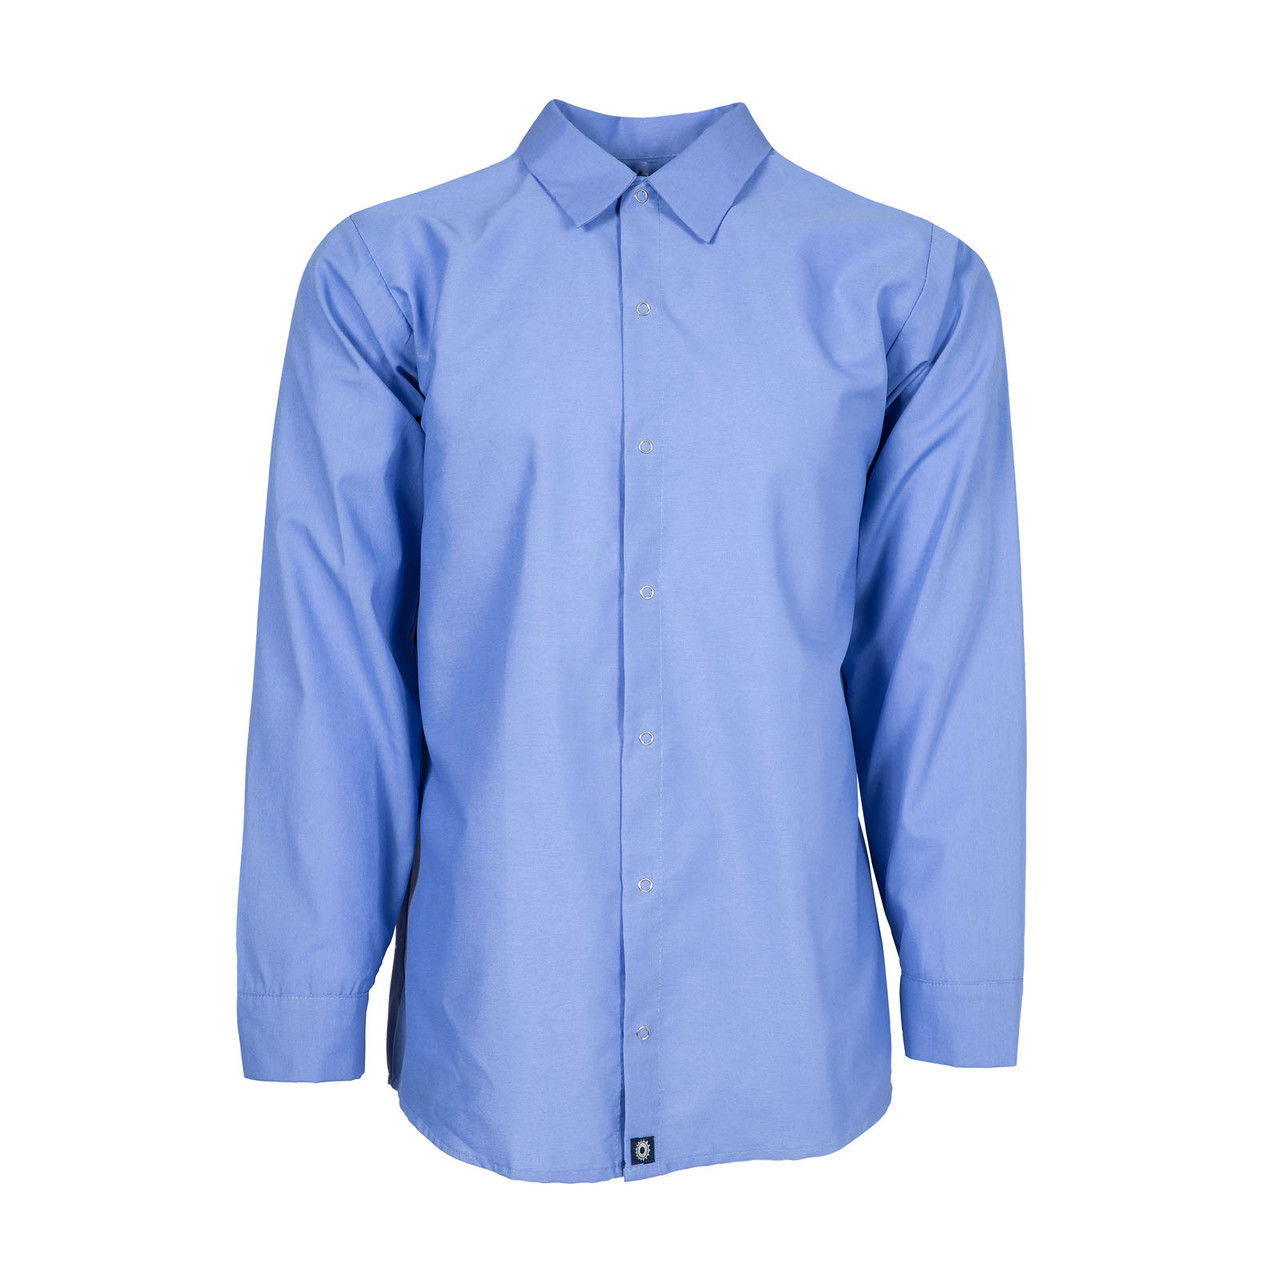 What kind of closure does the blue work shirt womens in Gulf Blue have?